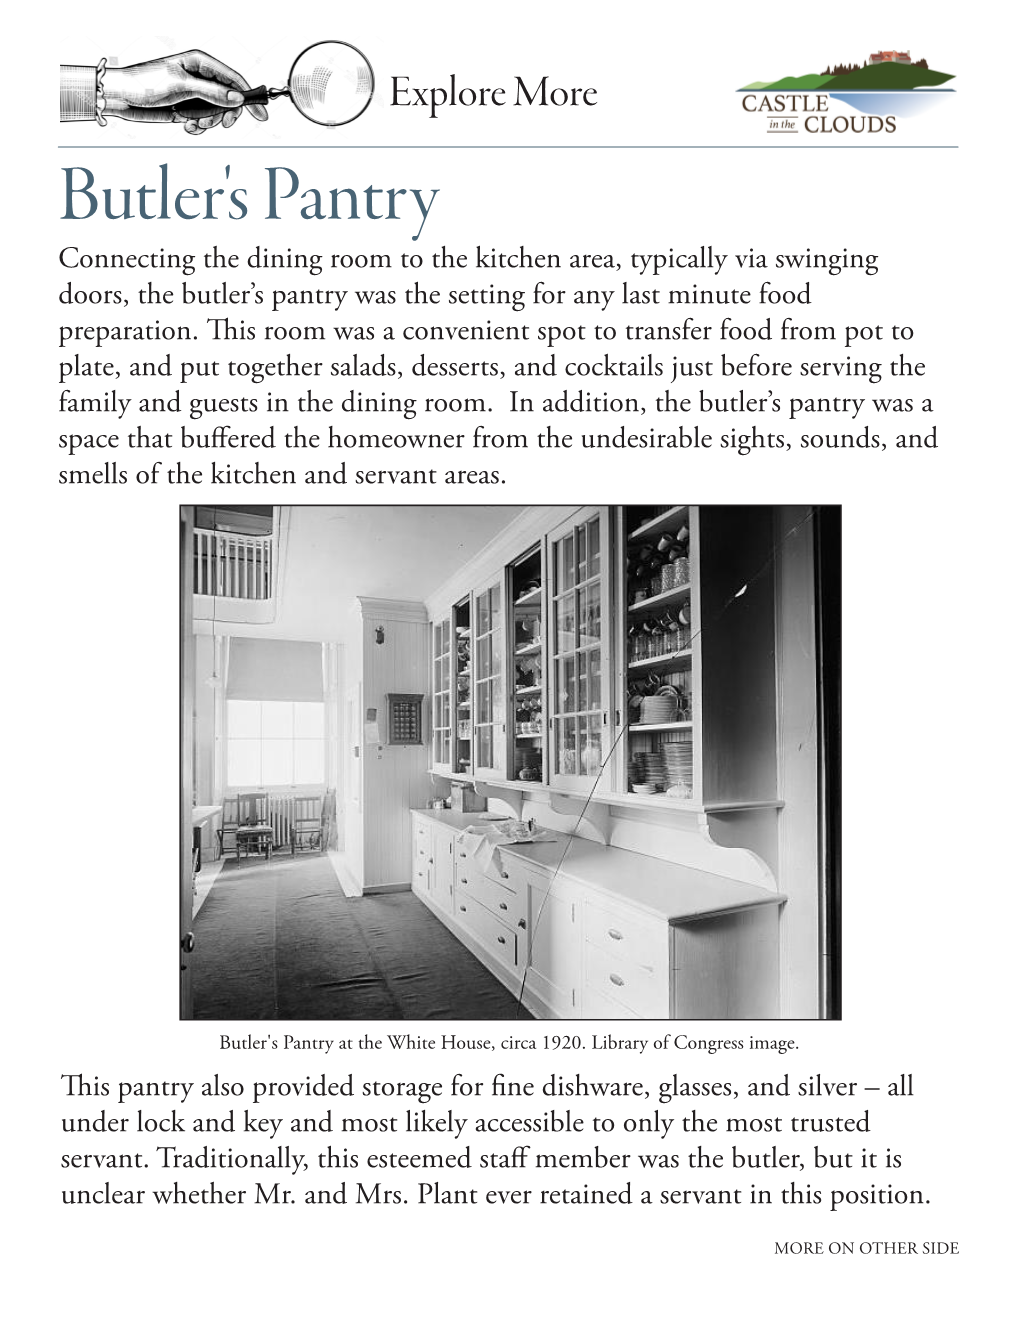 Butler's Pantry Connecting the Dining Room to the Kitchen Area, Typically Via Swinging Doors, the Butler’S Pantry Was the Setting for Any Last Minute Food Preparation